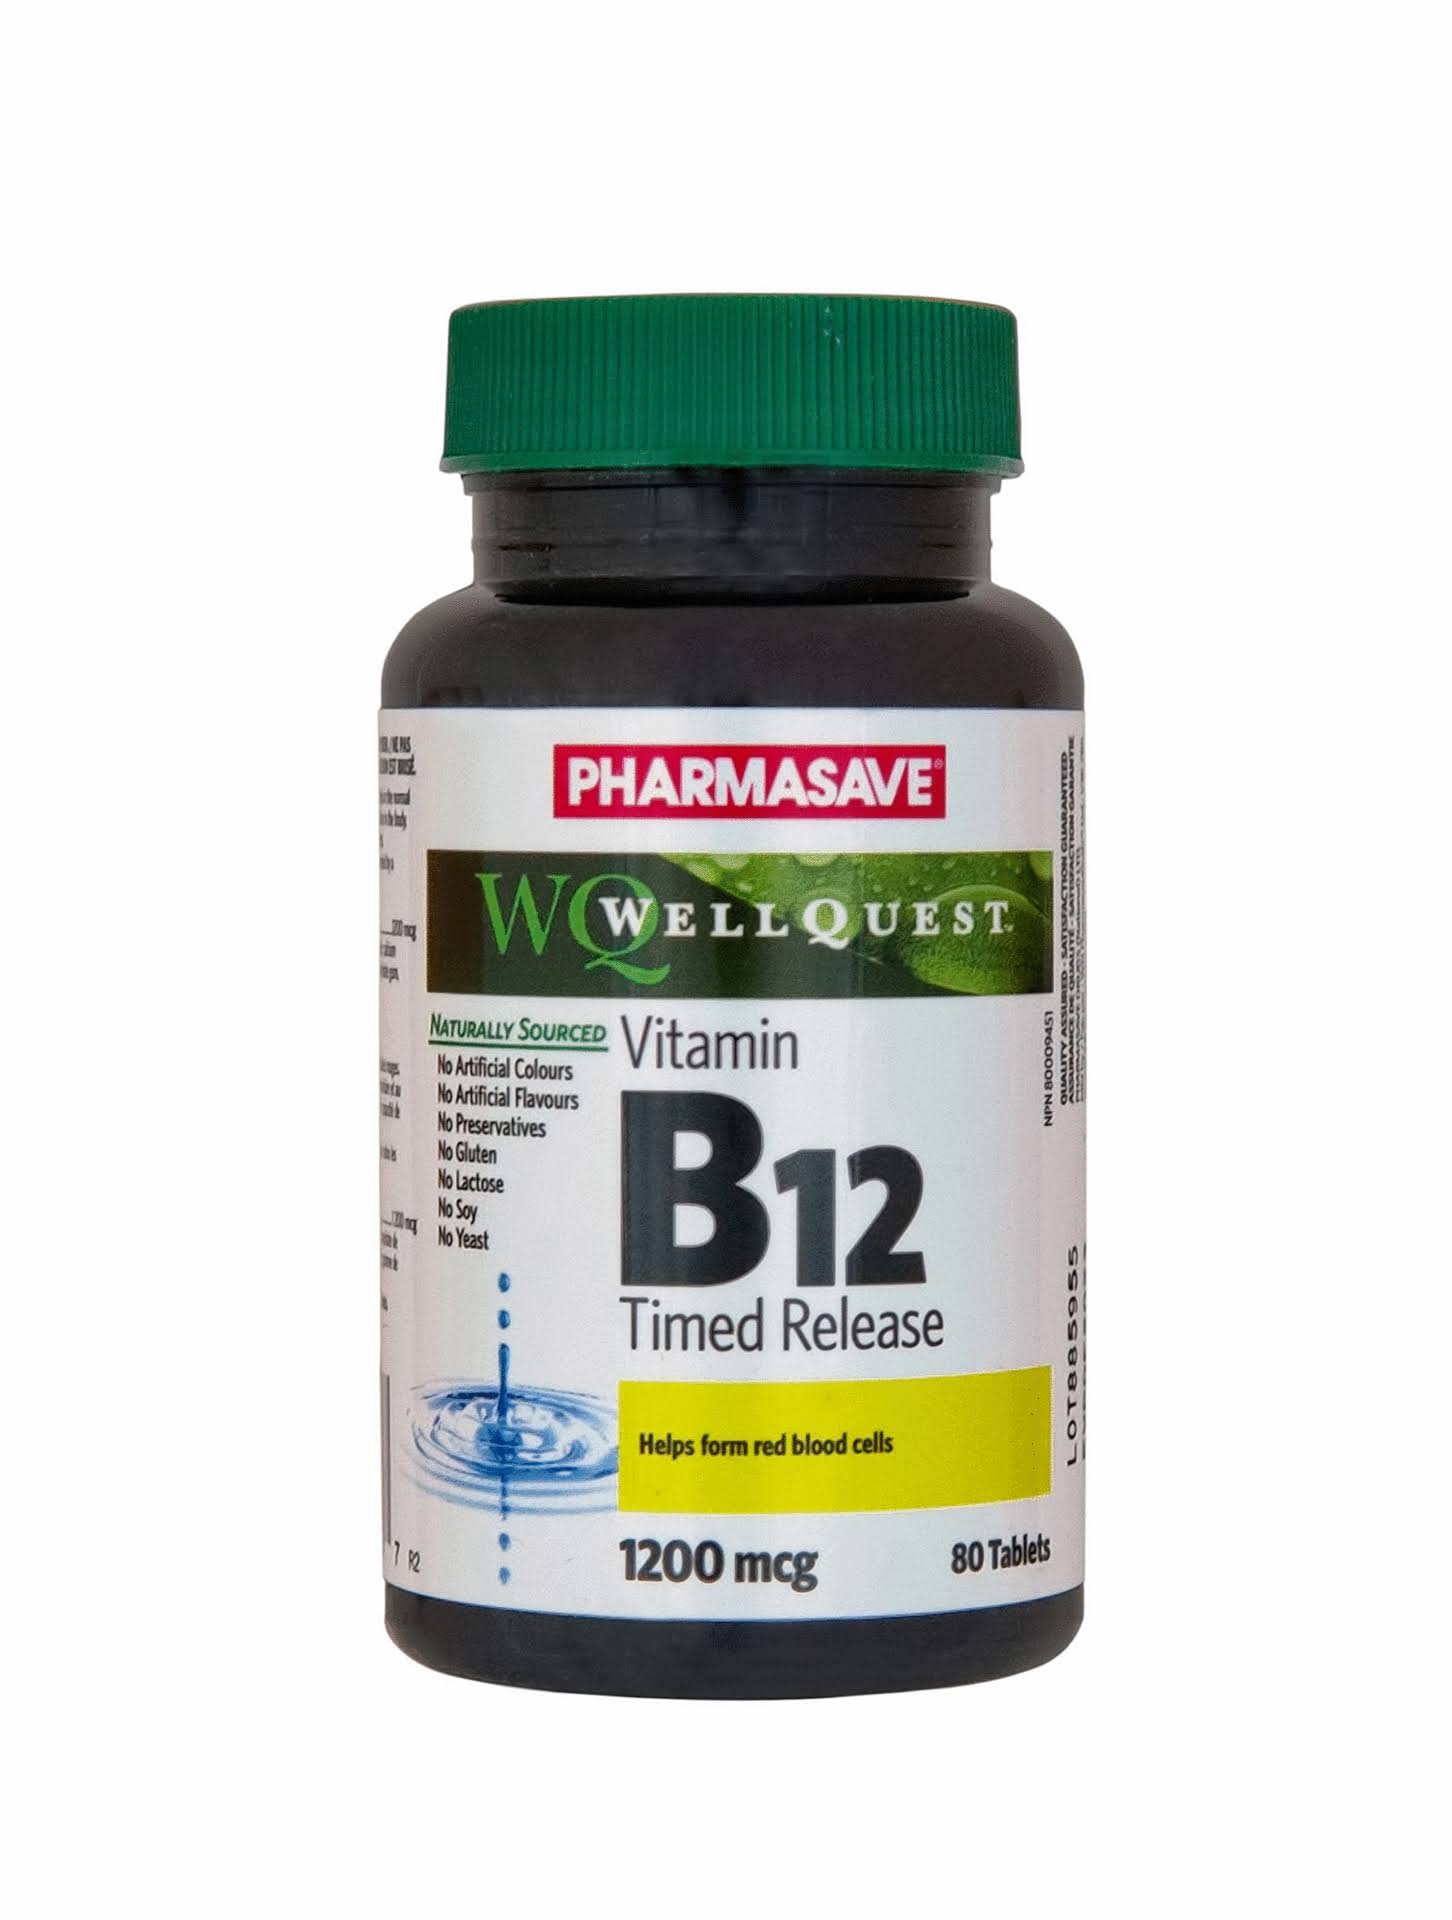 PHARMASAVE WELLQUEST VITAMIN B12 TIME RELEASE 1200MCG 80S